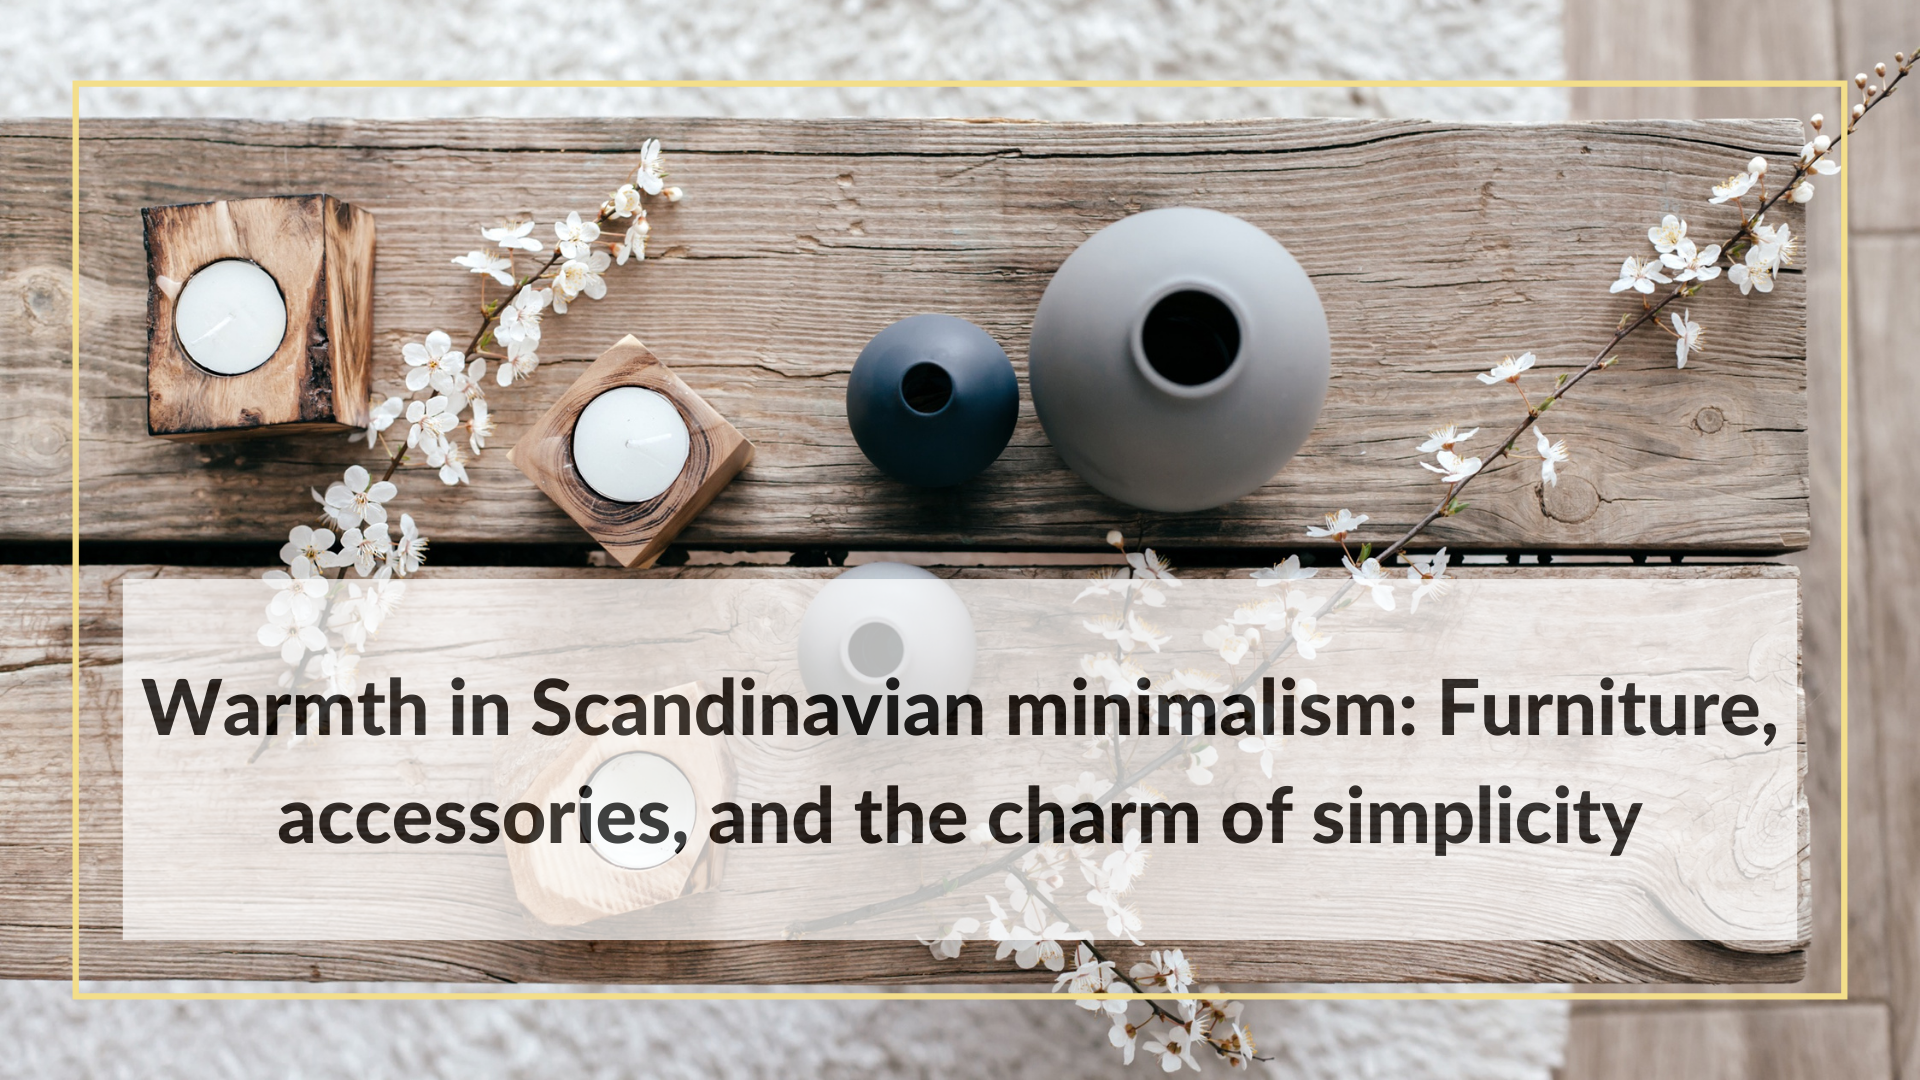 Warmth in Scandinavian minimalism Furniture, accessories, and the charm of simplicity